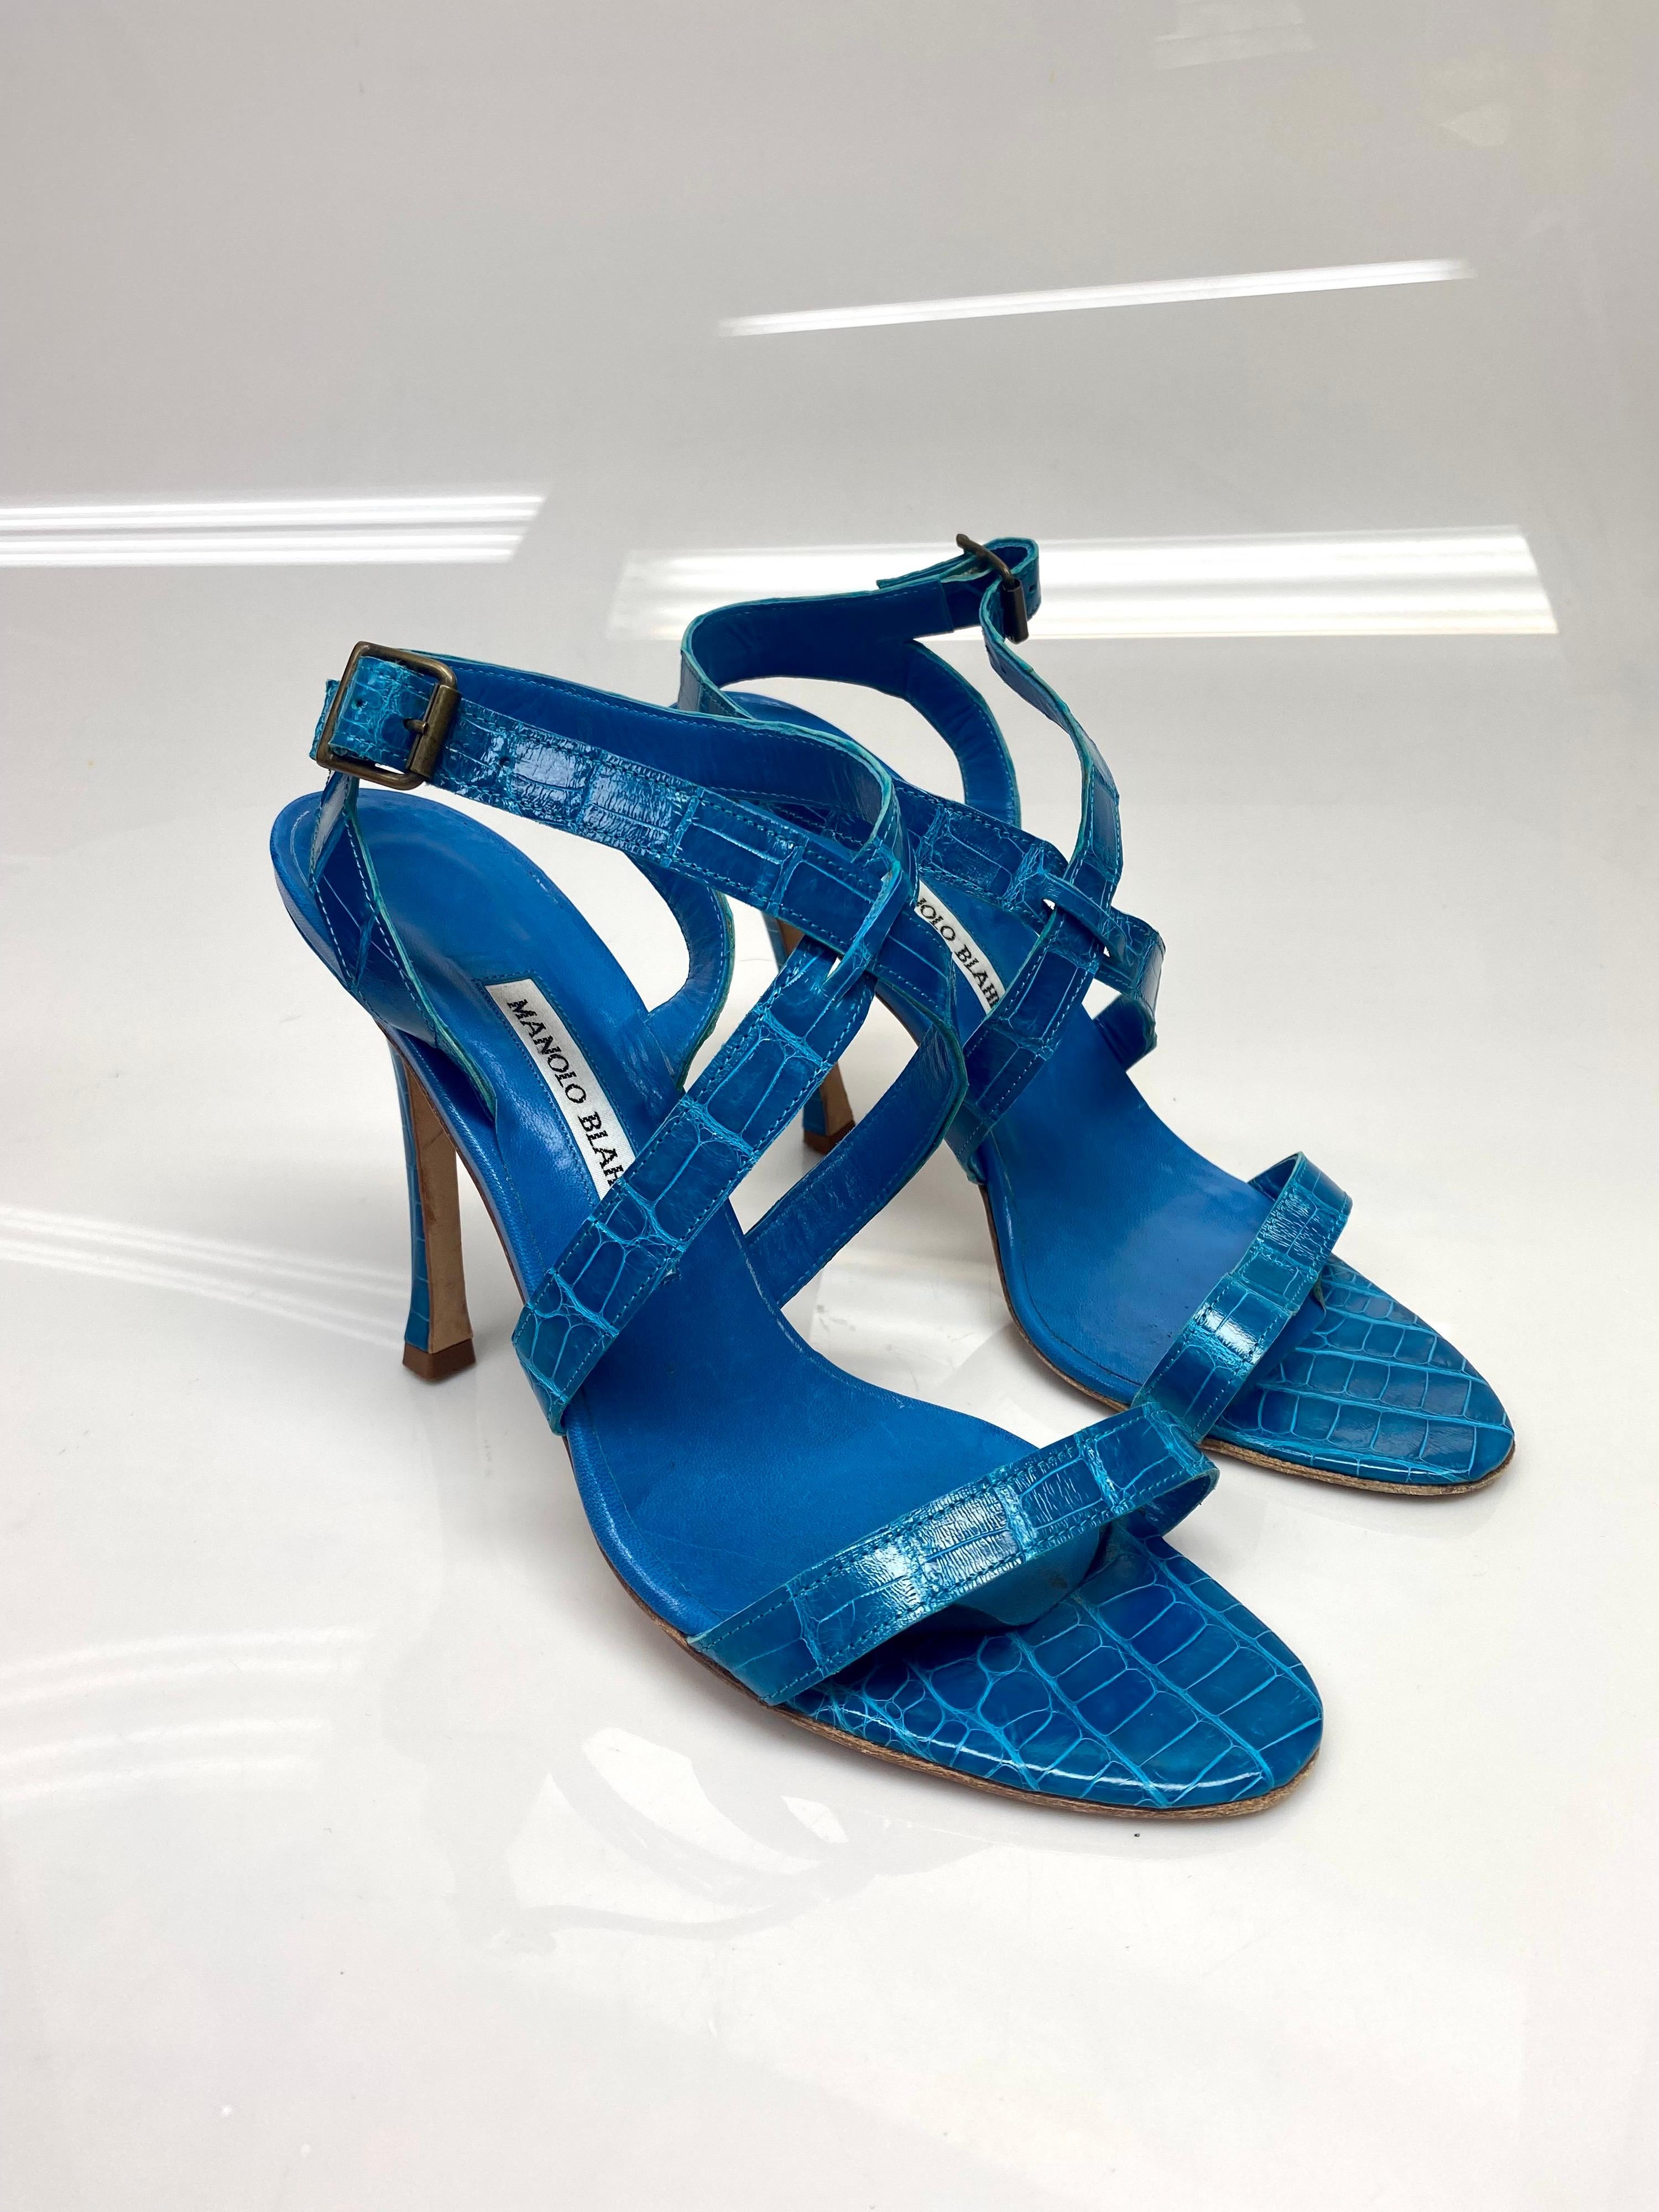 Manolo Blahnik Turquoise Crocodile Strappy Sandals - Size 39.5. A beautiful pair of Crocodile Manolo Blahnik shoes that are easy to wear and flaunt. These sandals are highly versatile. Constructed from top quality crocodile these are the perfect pop